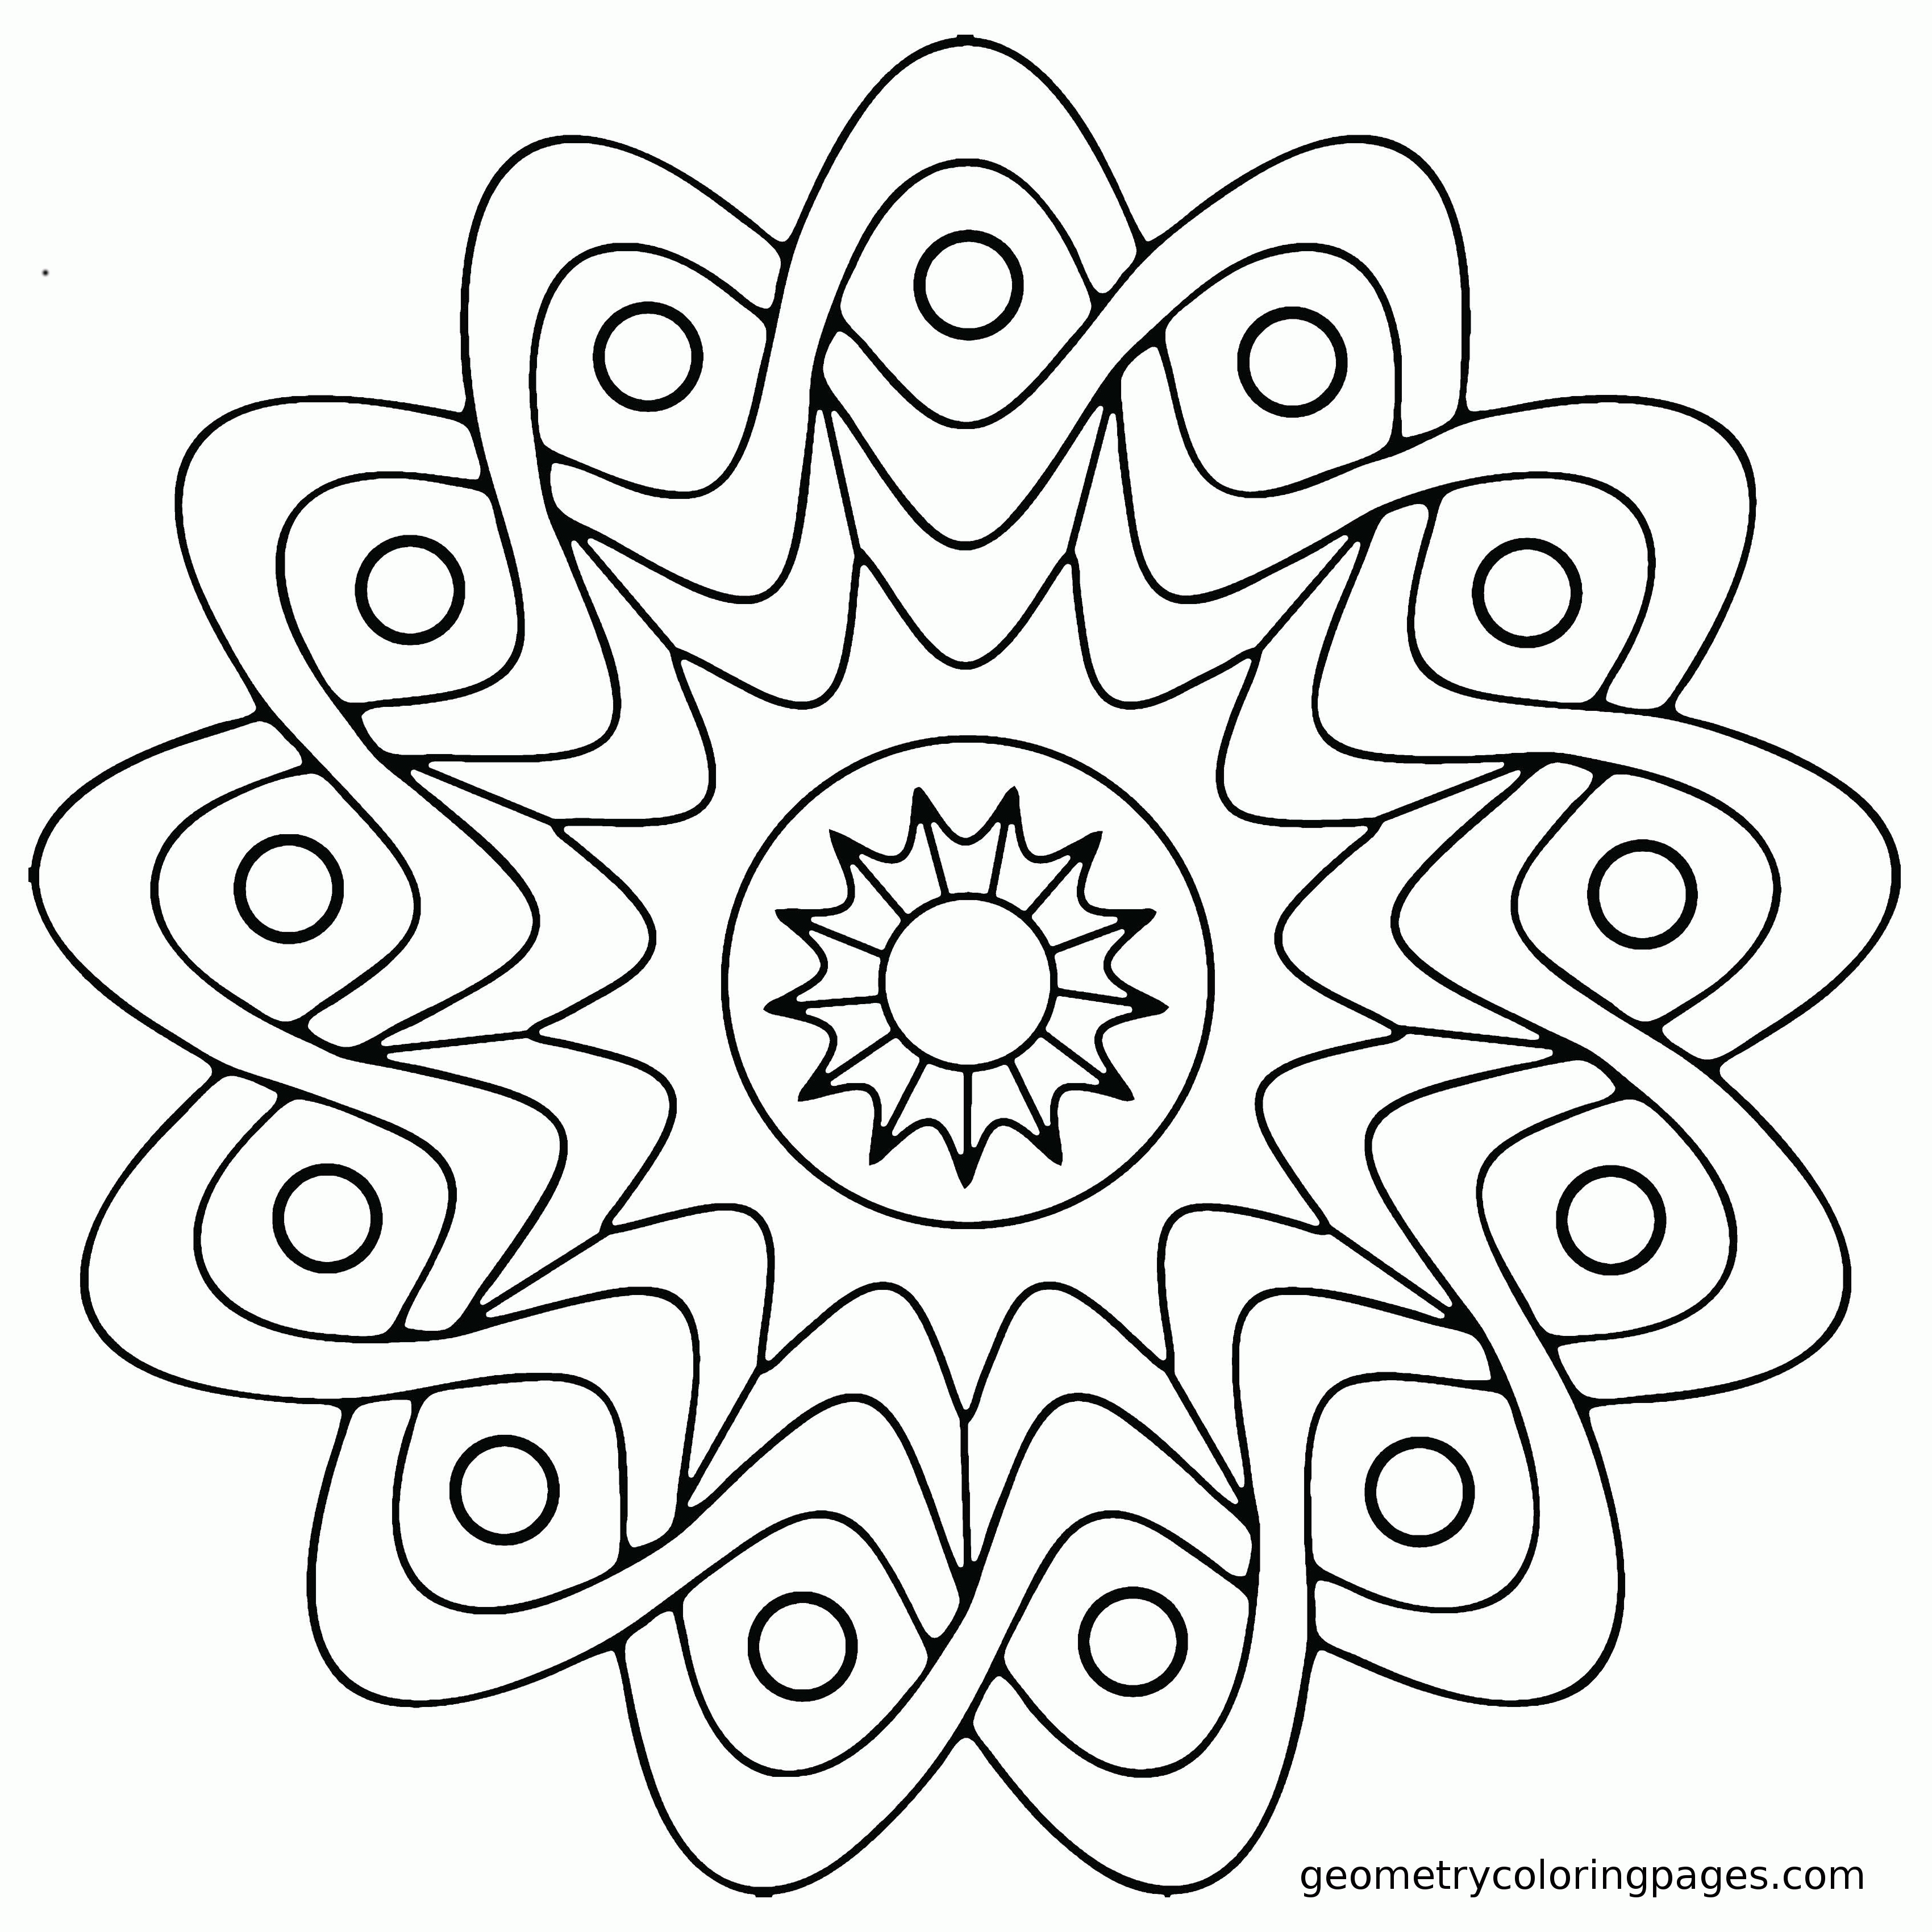 easy-coloring-pages-for-boys-frog-simple-mandala-coloring-pages